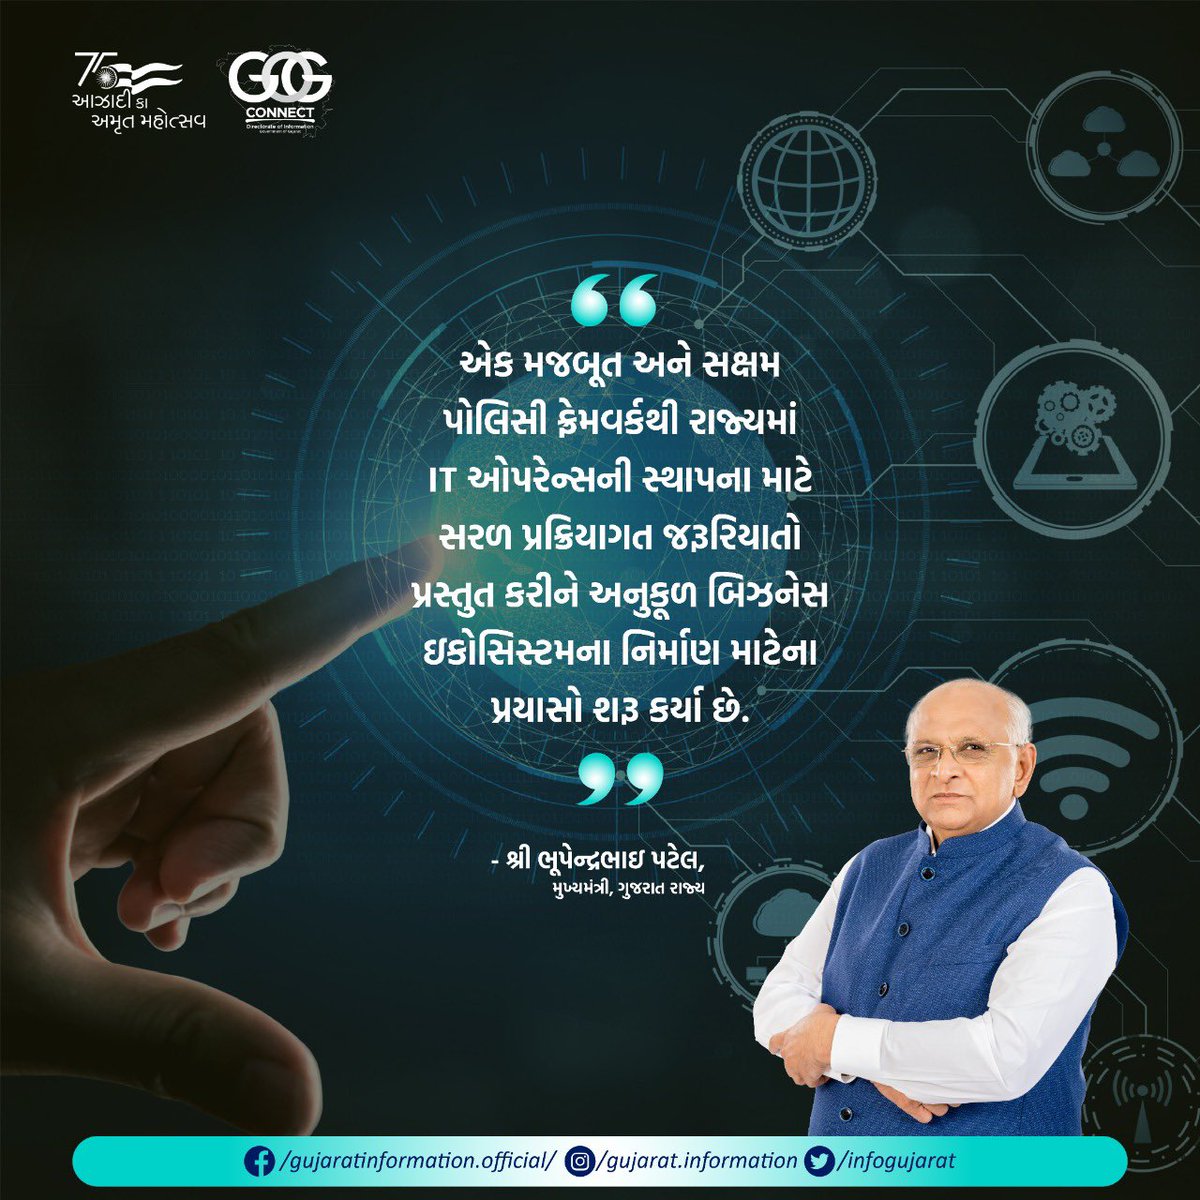 #GujaratITPolicy #ITPolicy #GOGConnect 

Gujarat leading the way - Information technology Policy 2022-27